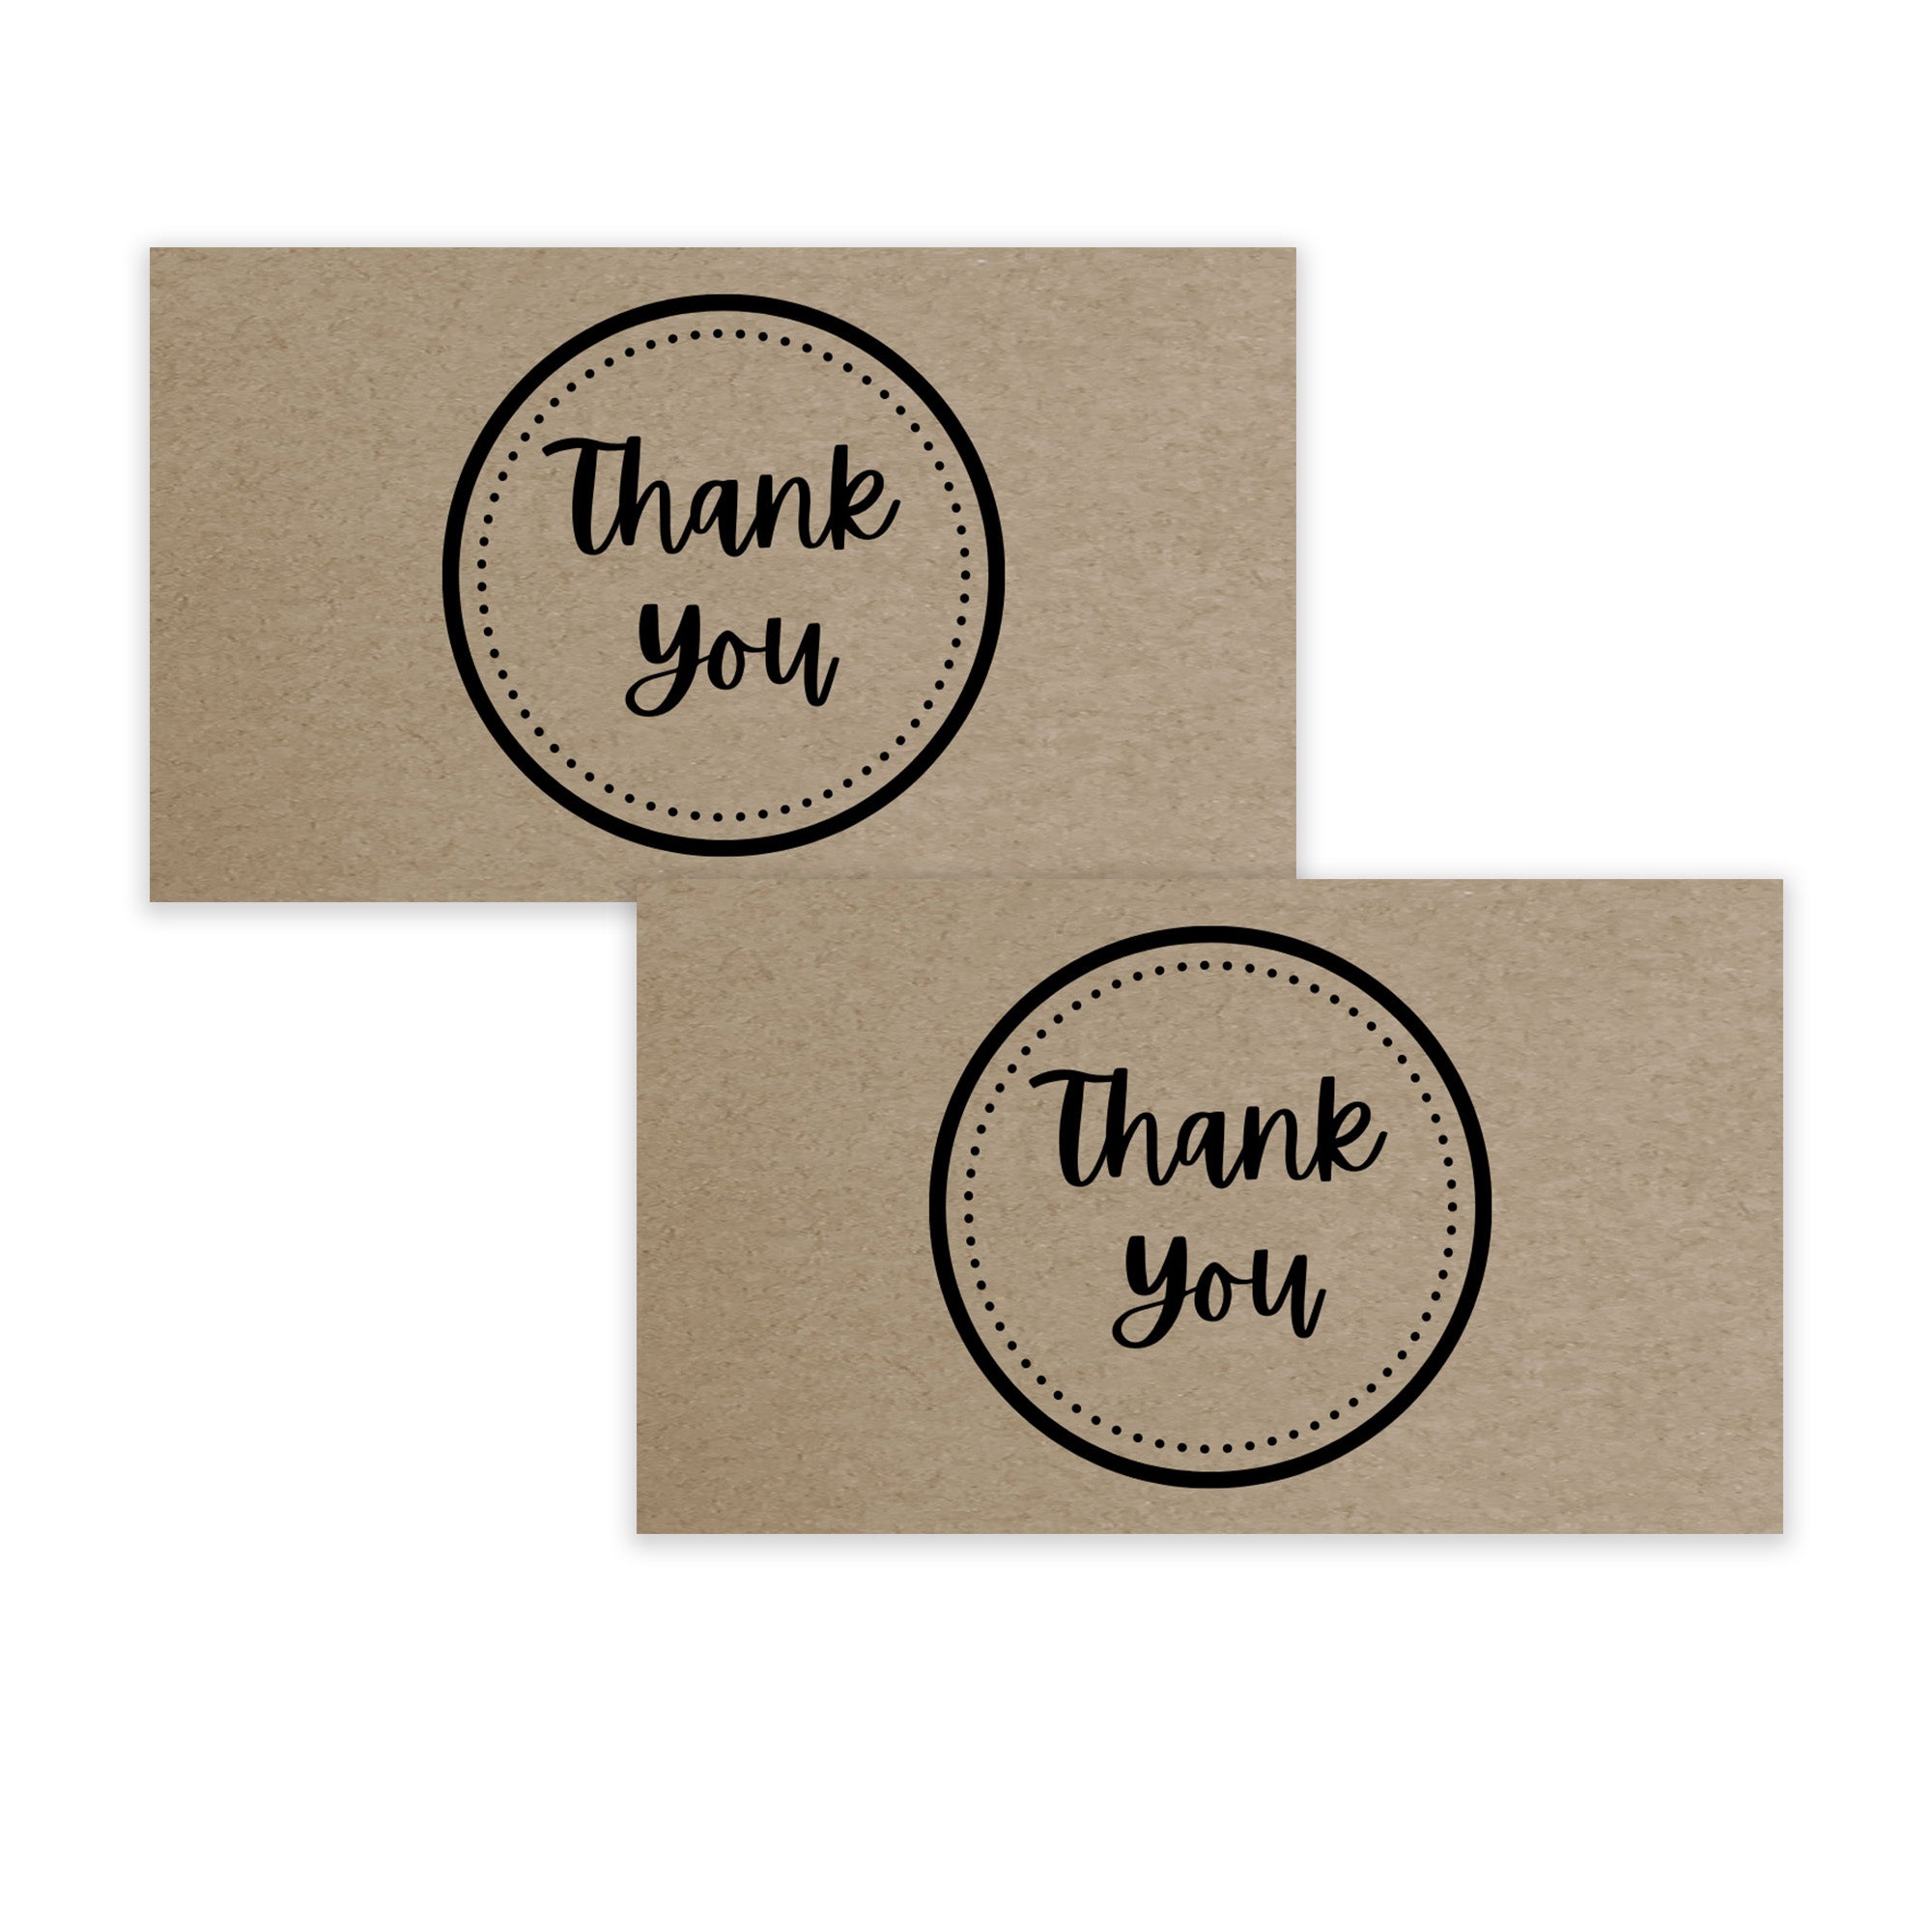 Kraft Business card size thank you cards for your small business